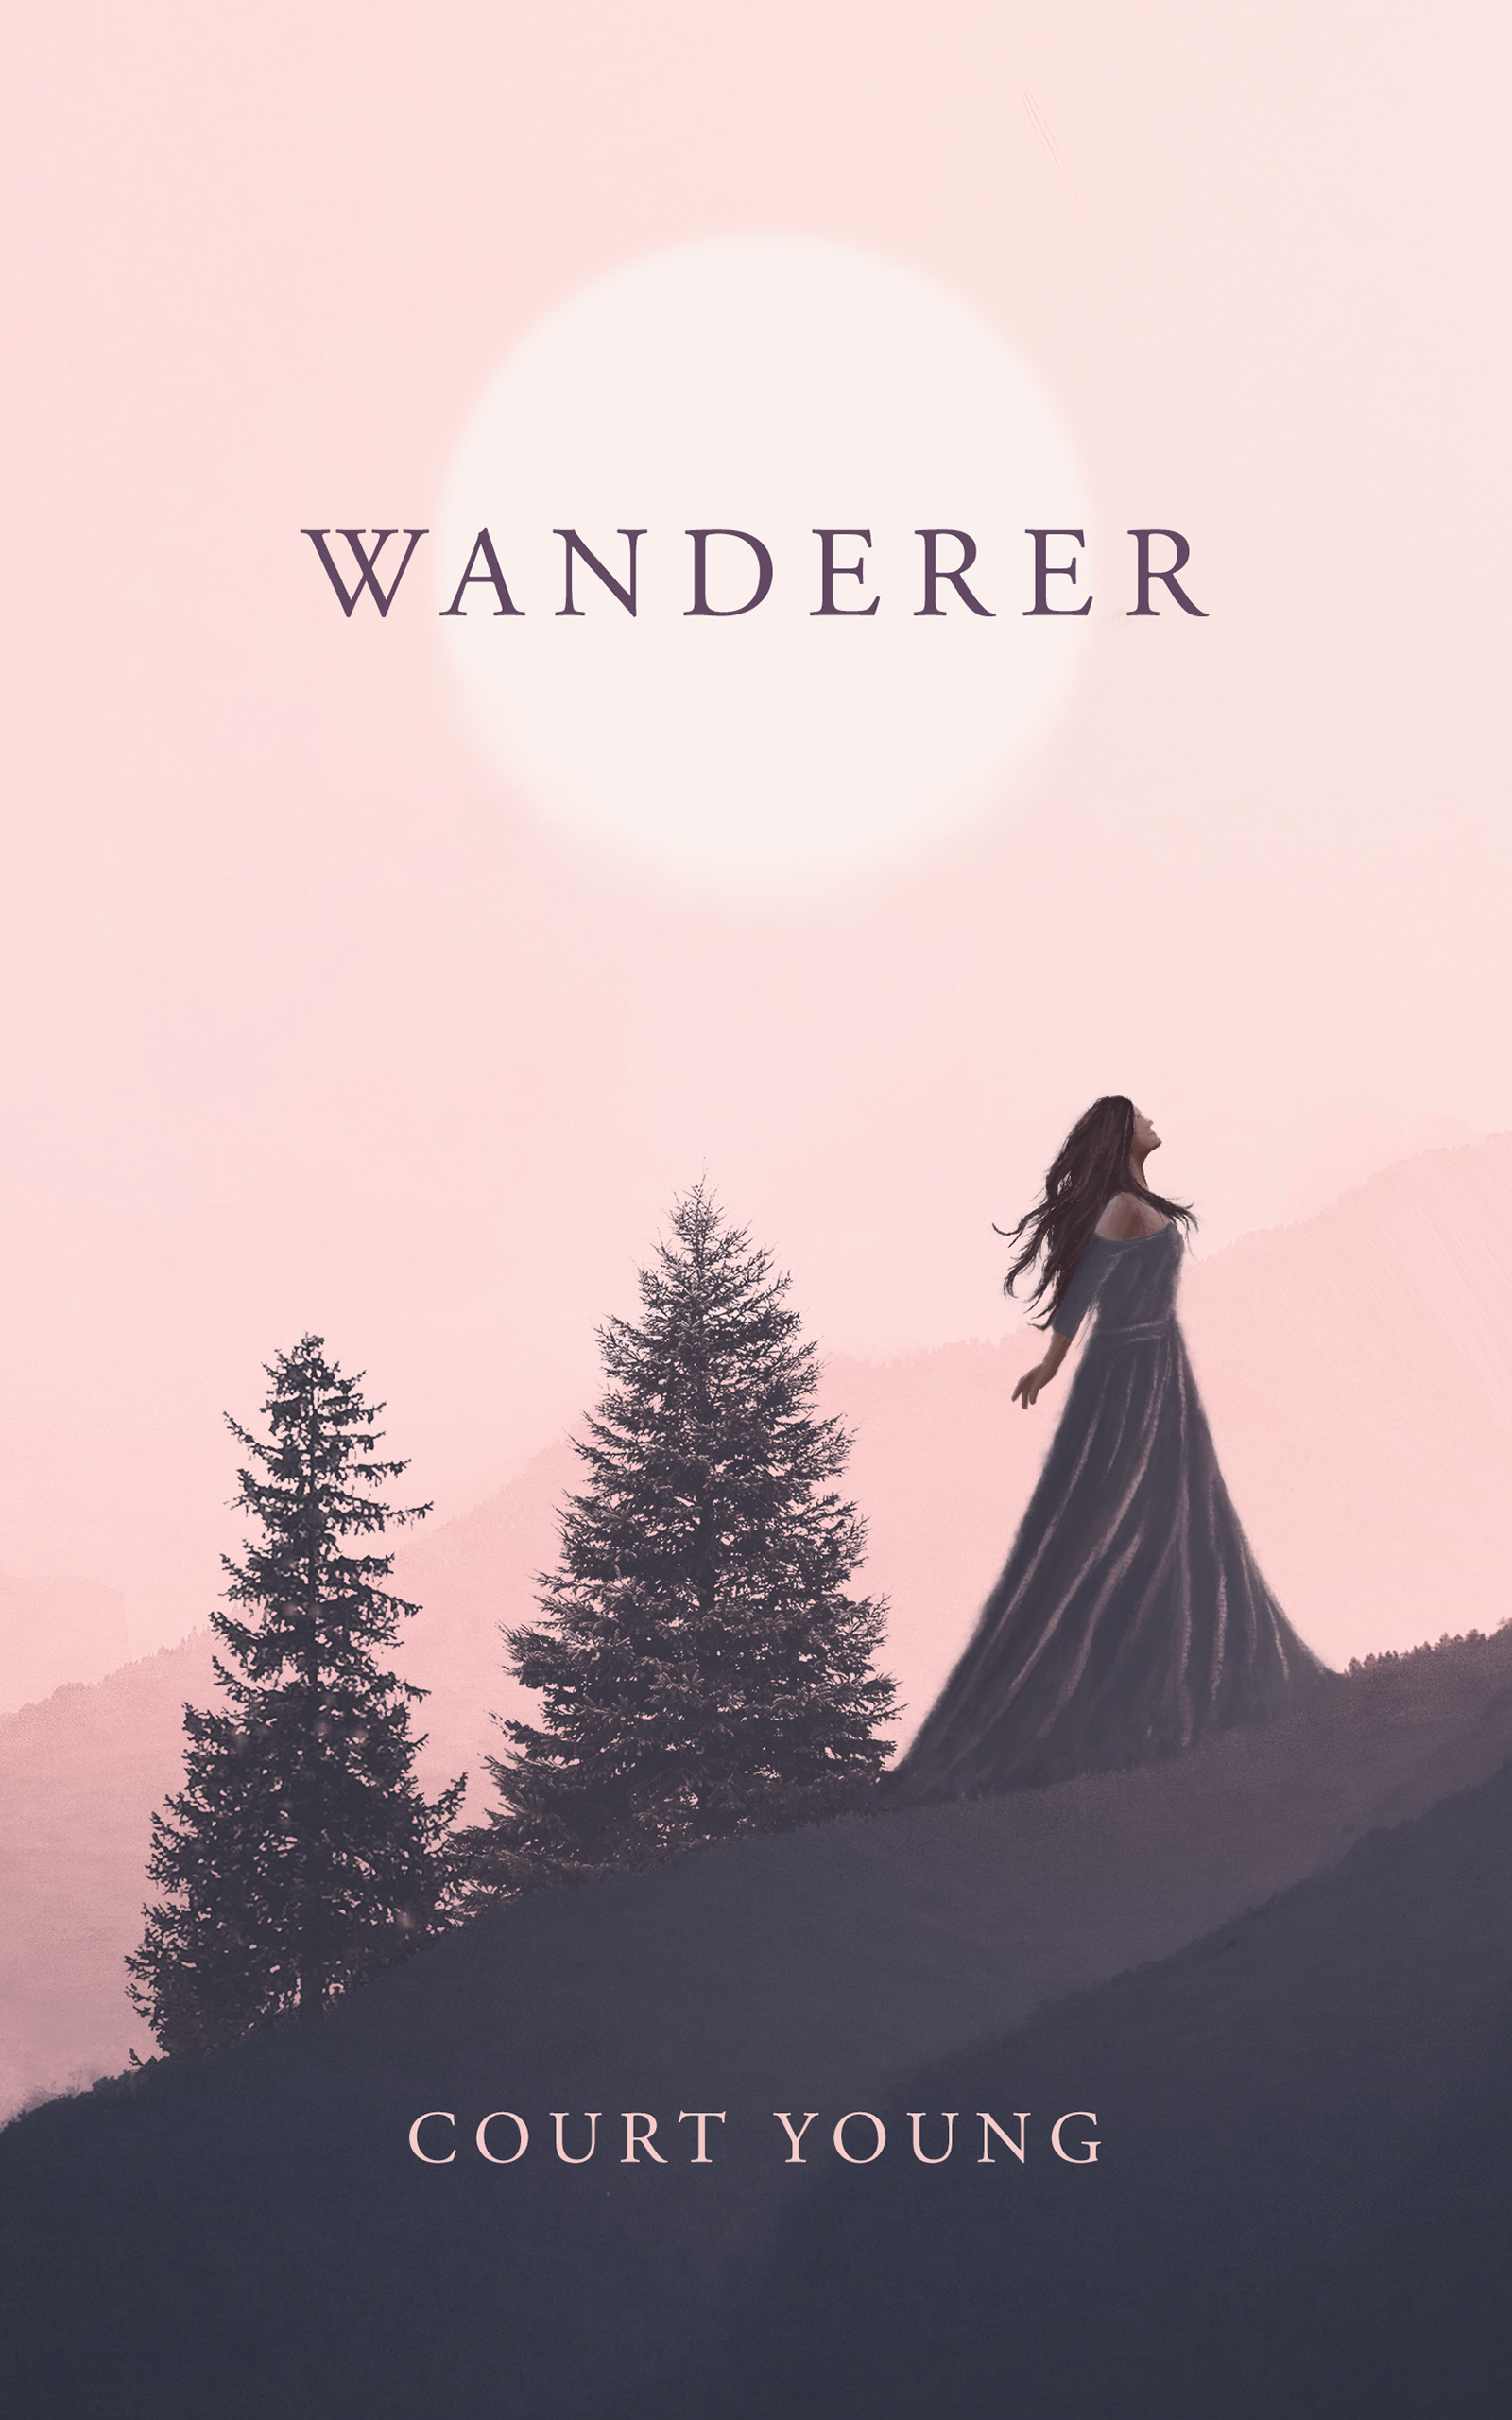 WANDERER by Court Young